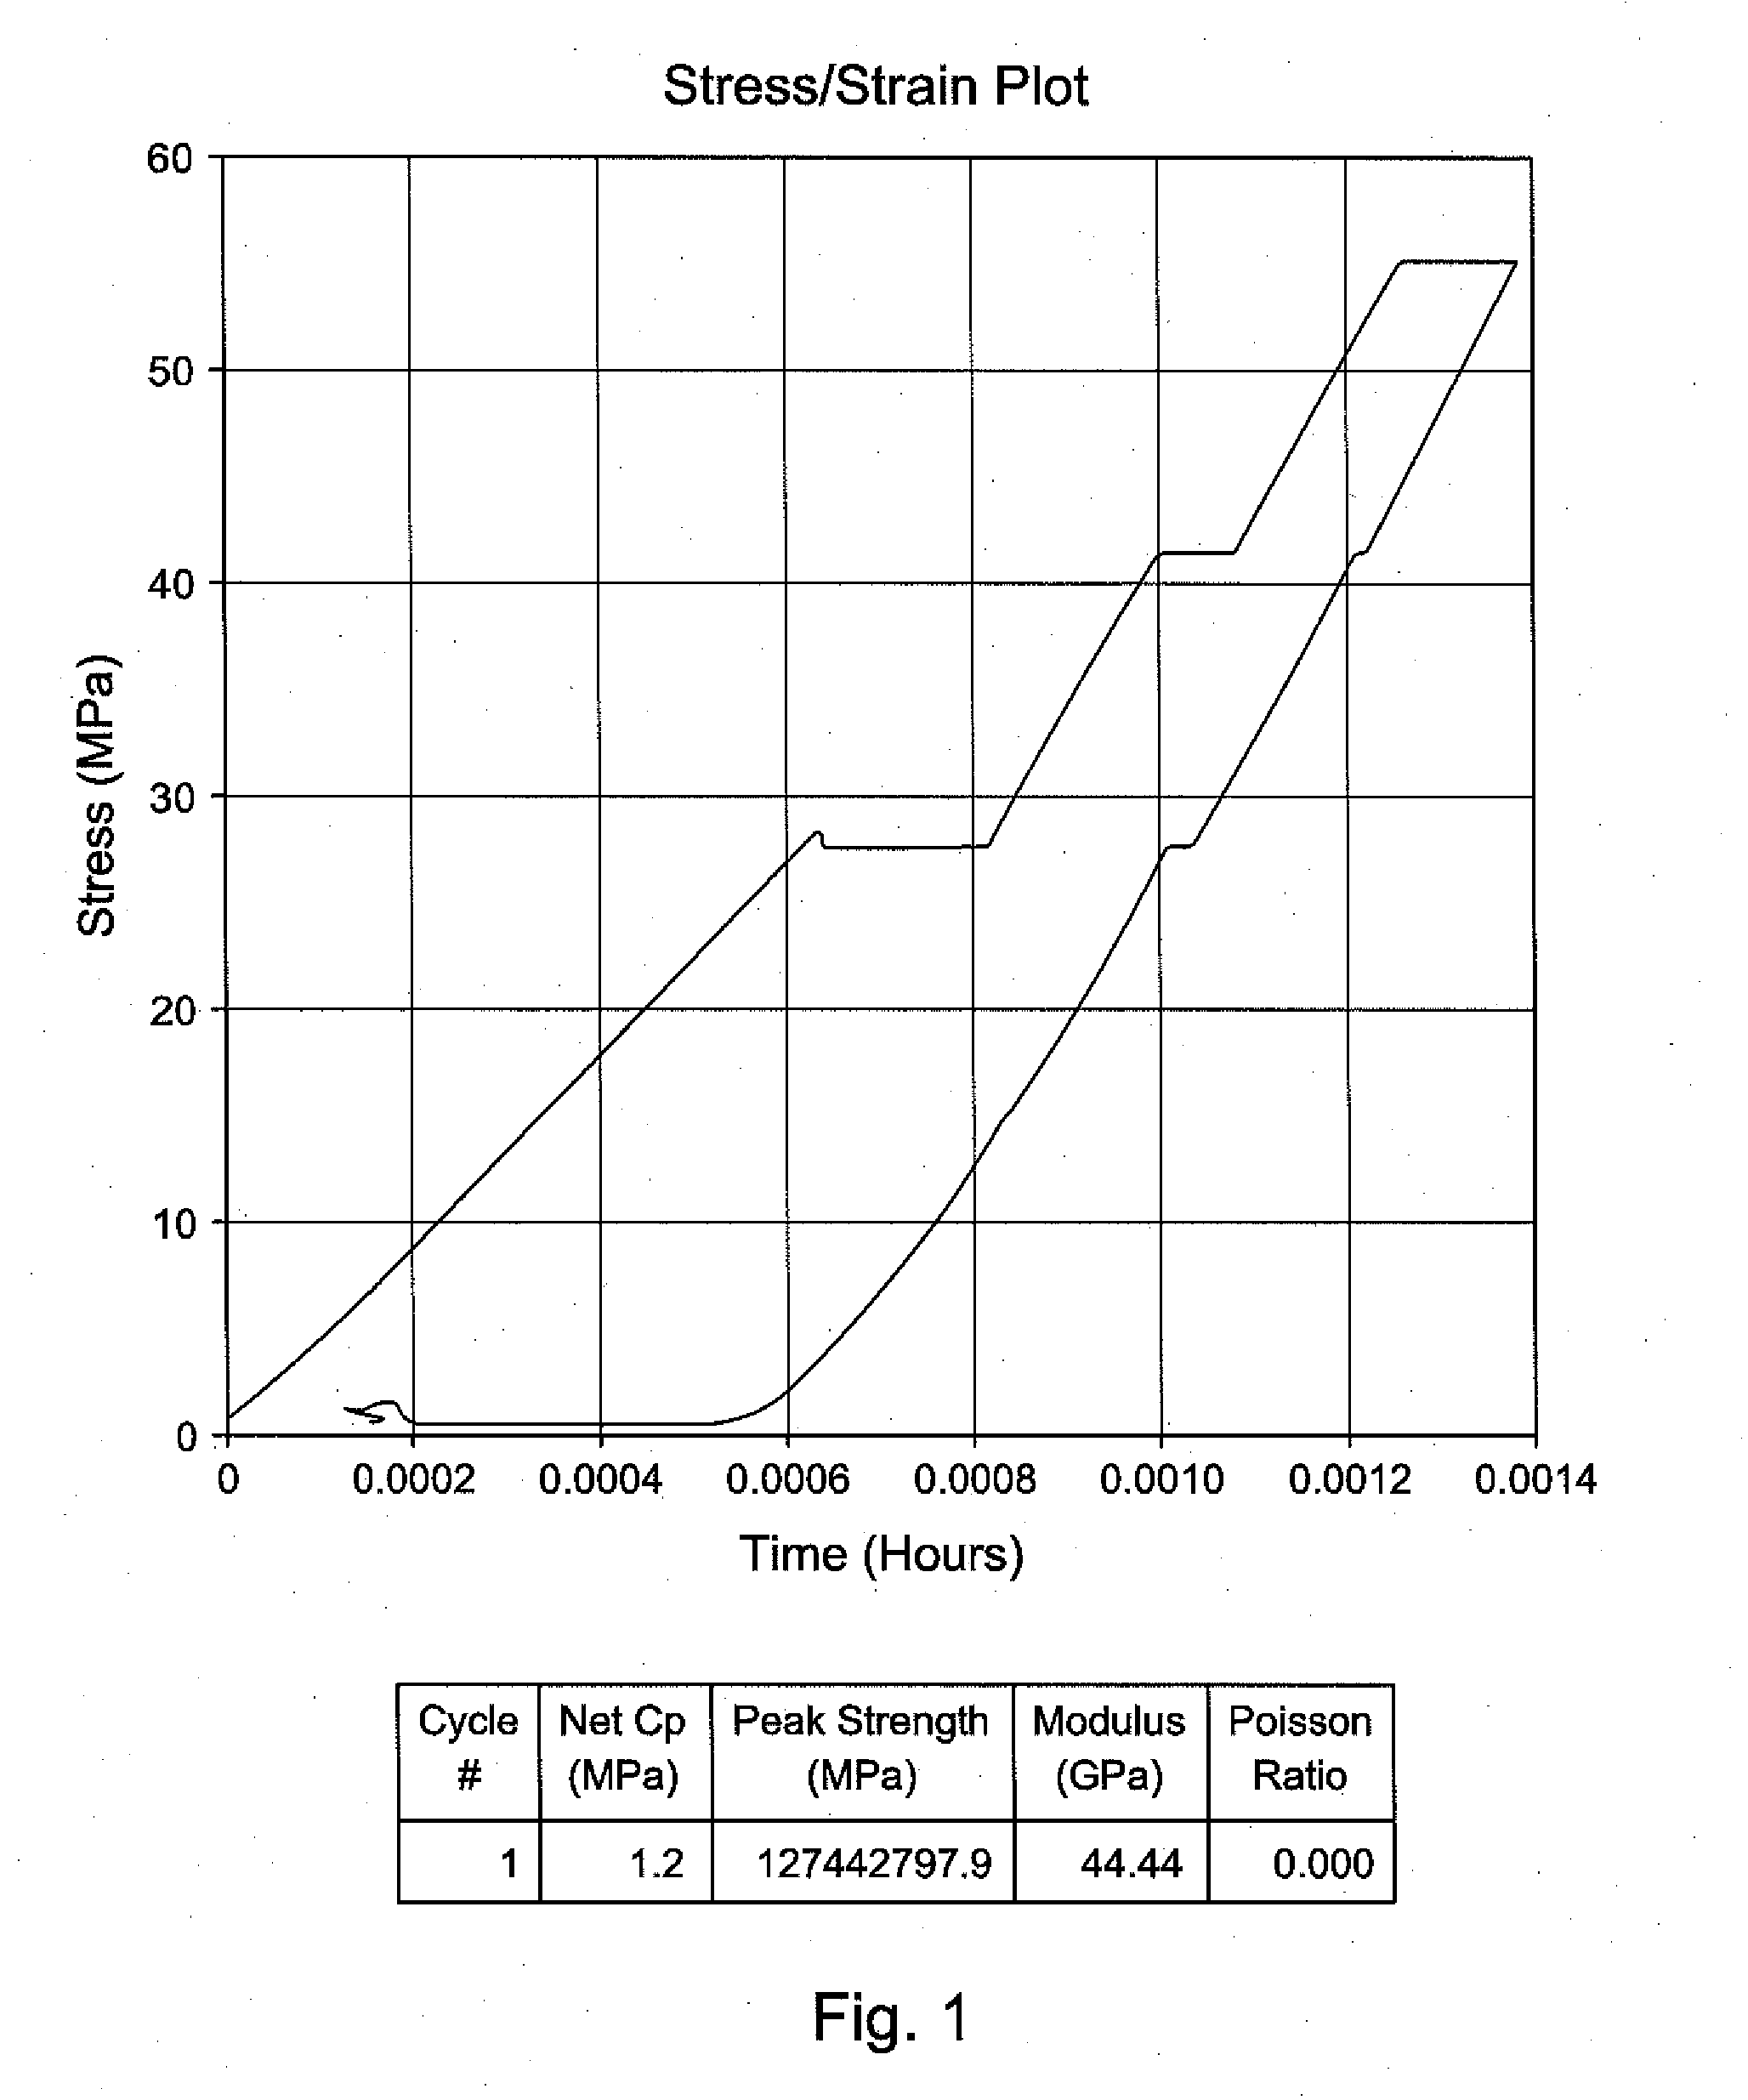 Laboratory Testing Procedure to Select Acid or Proppant Fracturing Stimulation Treatment for a Given Carbonate Formation